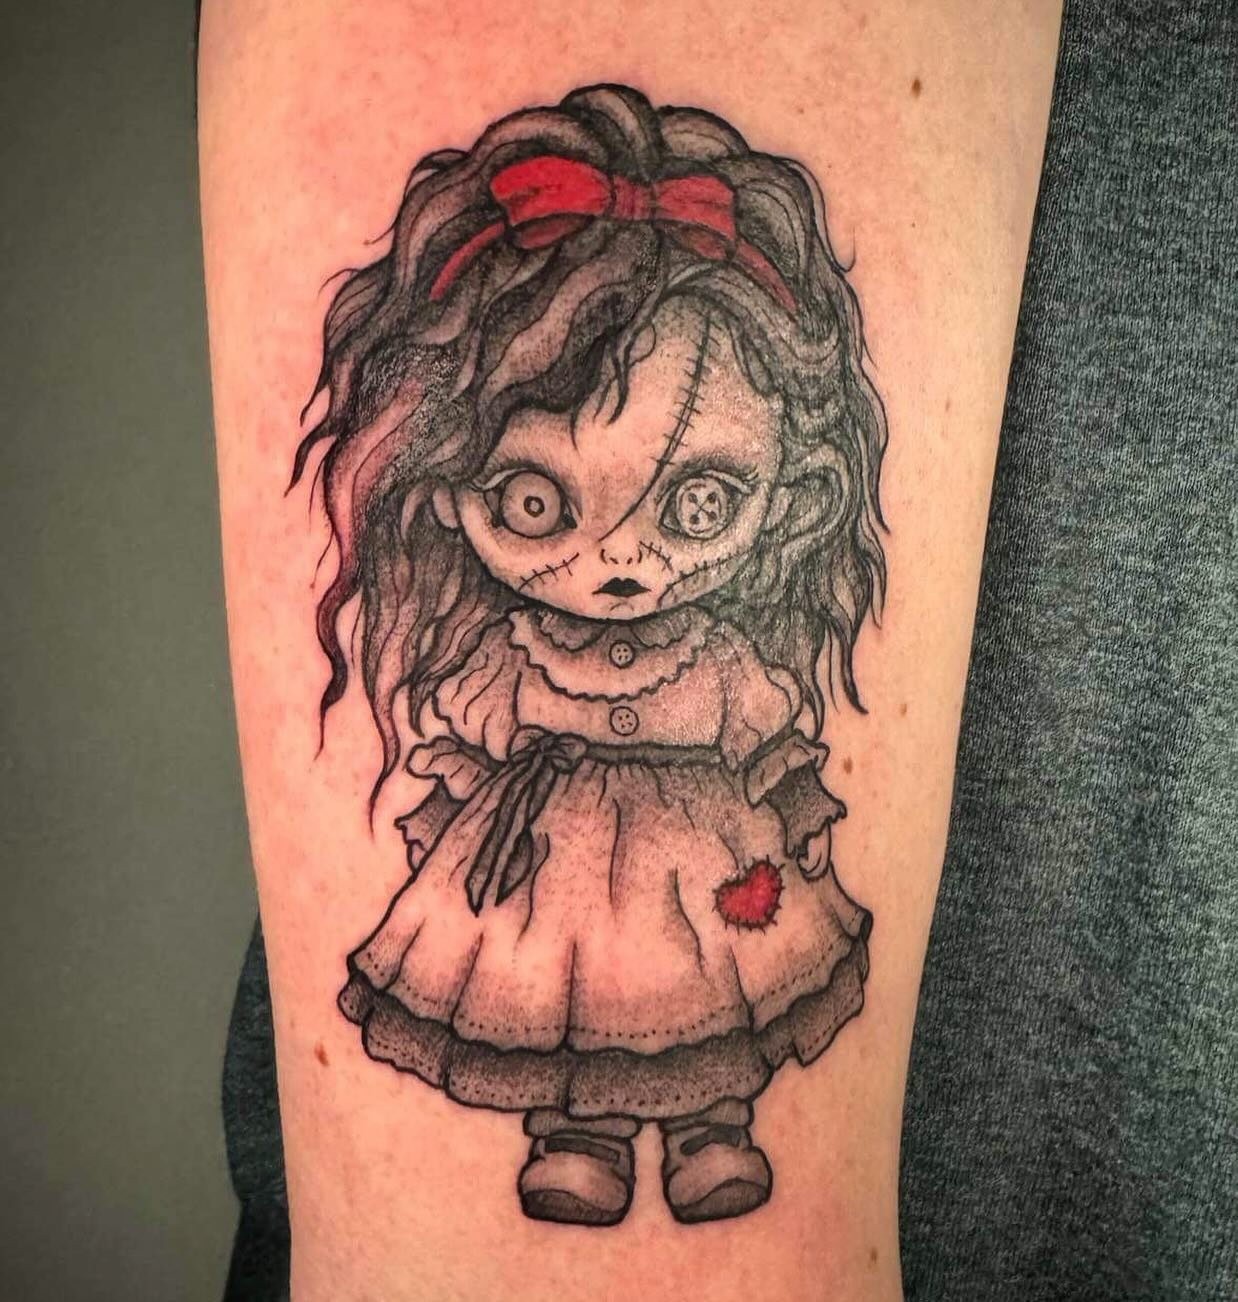 Check out this creepy voodoo doll done by @nosoul 

Book in a consult with Justin - 905-725-0301

#tattoos#oshawa#whitby#ajax#bowmanville#courtice#ink#canadianartist#voodoo#doll#creepy#canada#durhamregion#clarington#motorcitytattoos#inklife#art